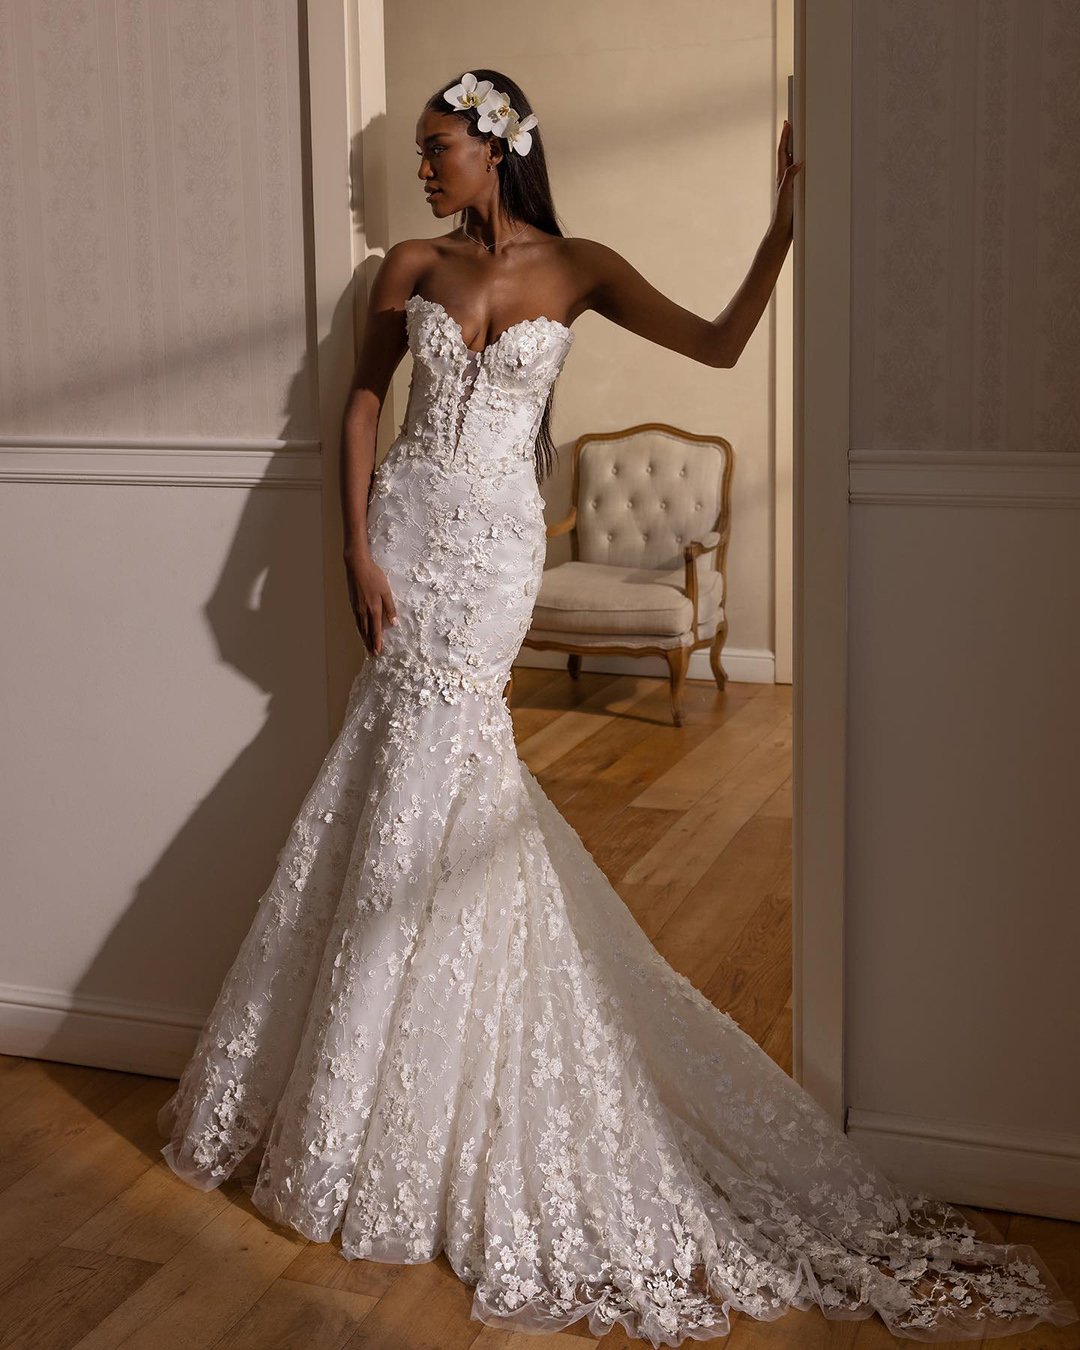 sexy wedding dresses ideas sweetheart neckline strapless fit and flare pninatornai